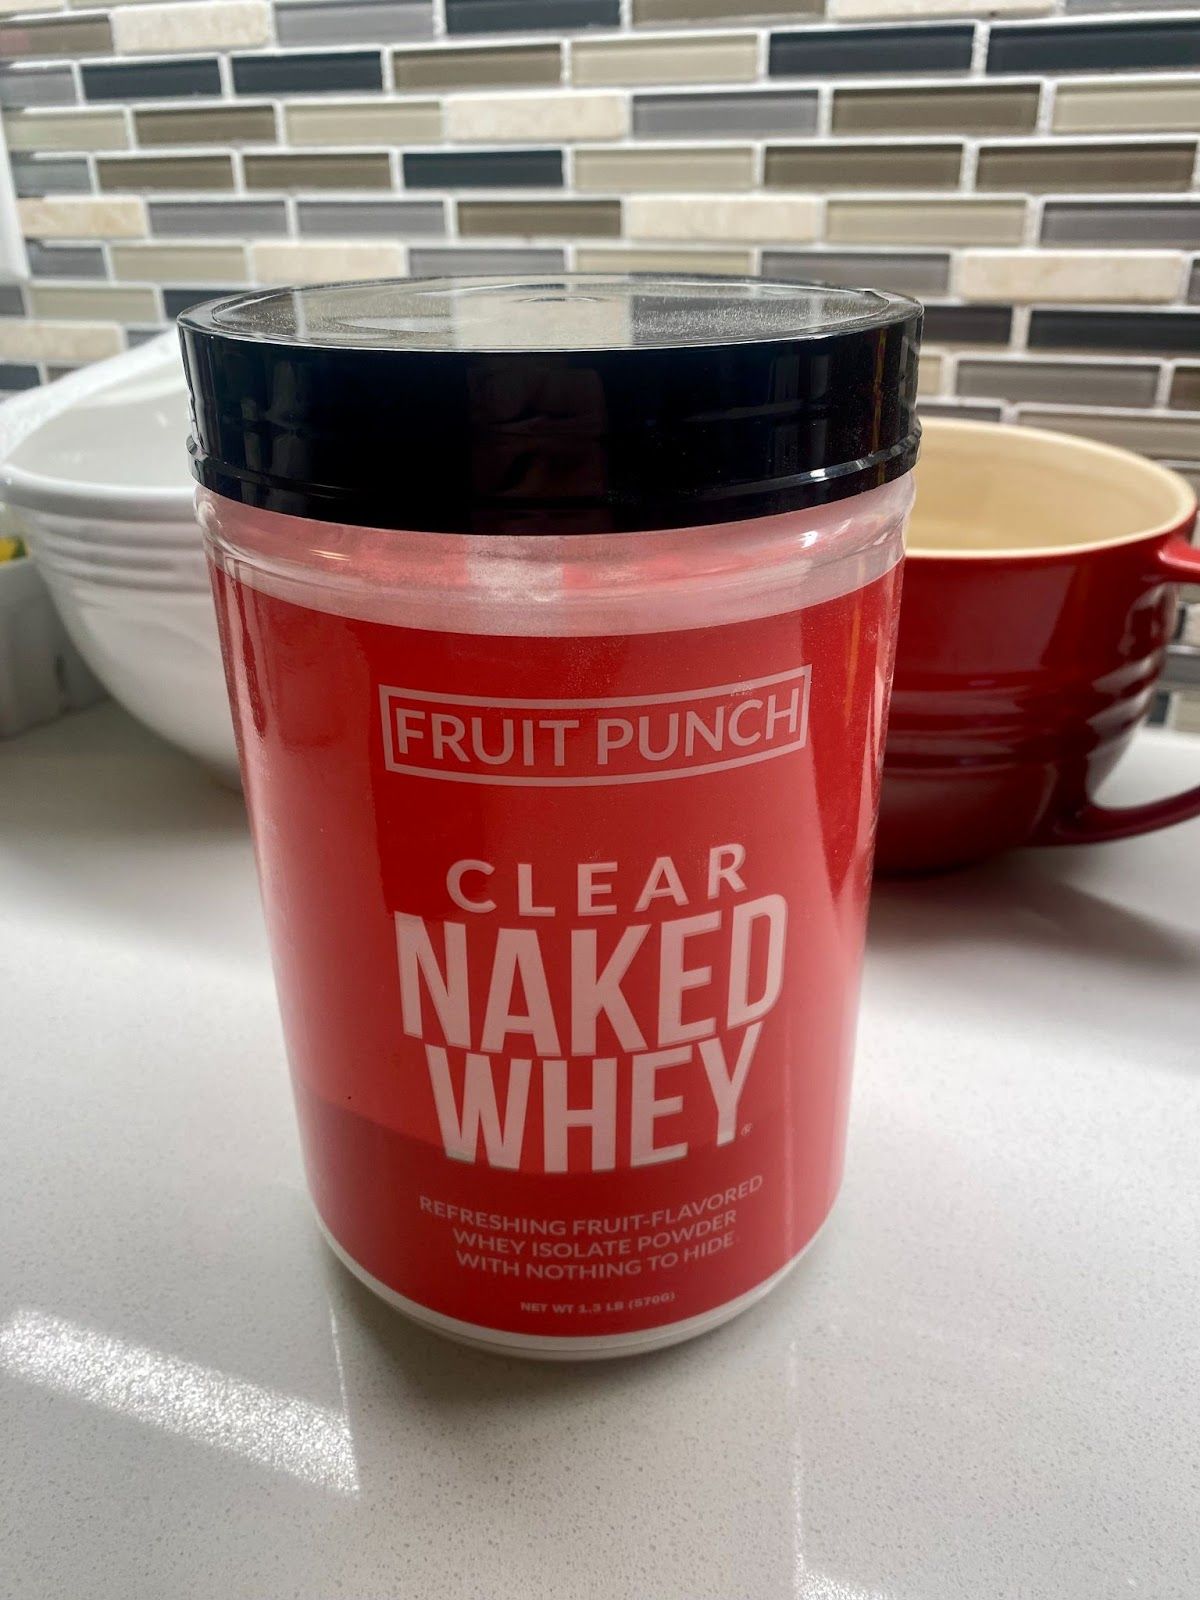 Fruit Punch - Clear Naked Whey